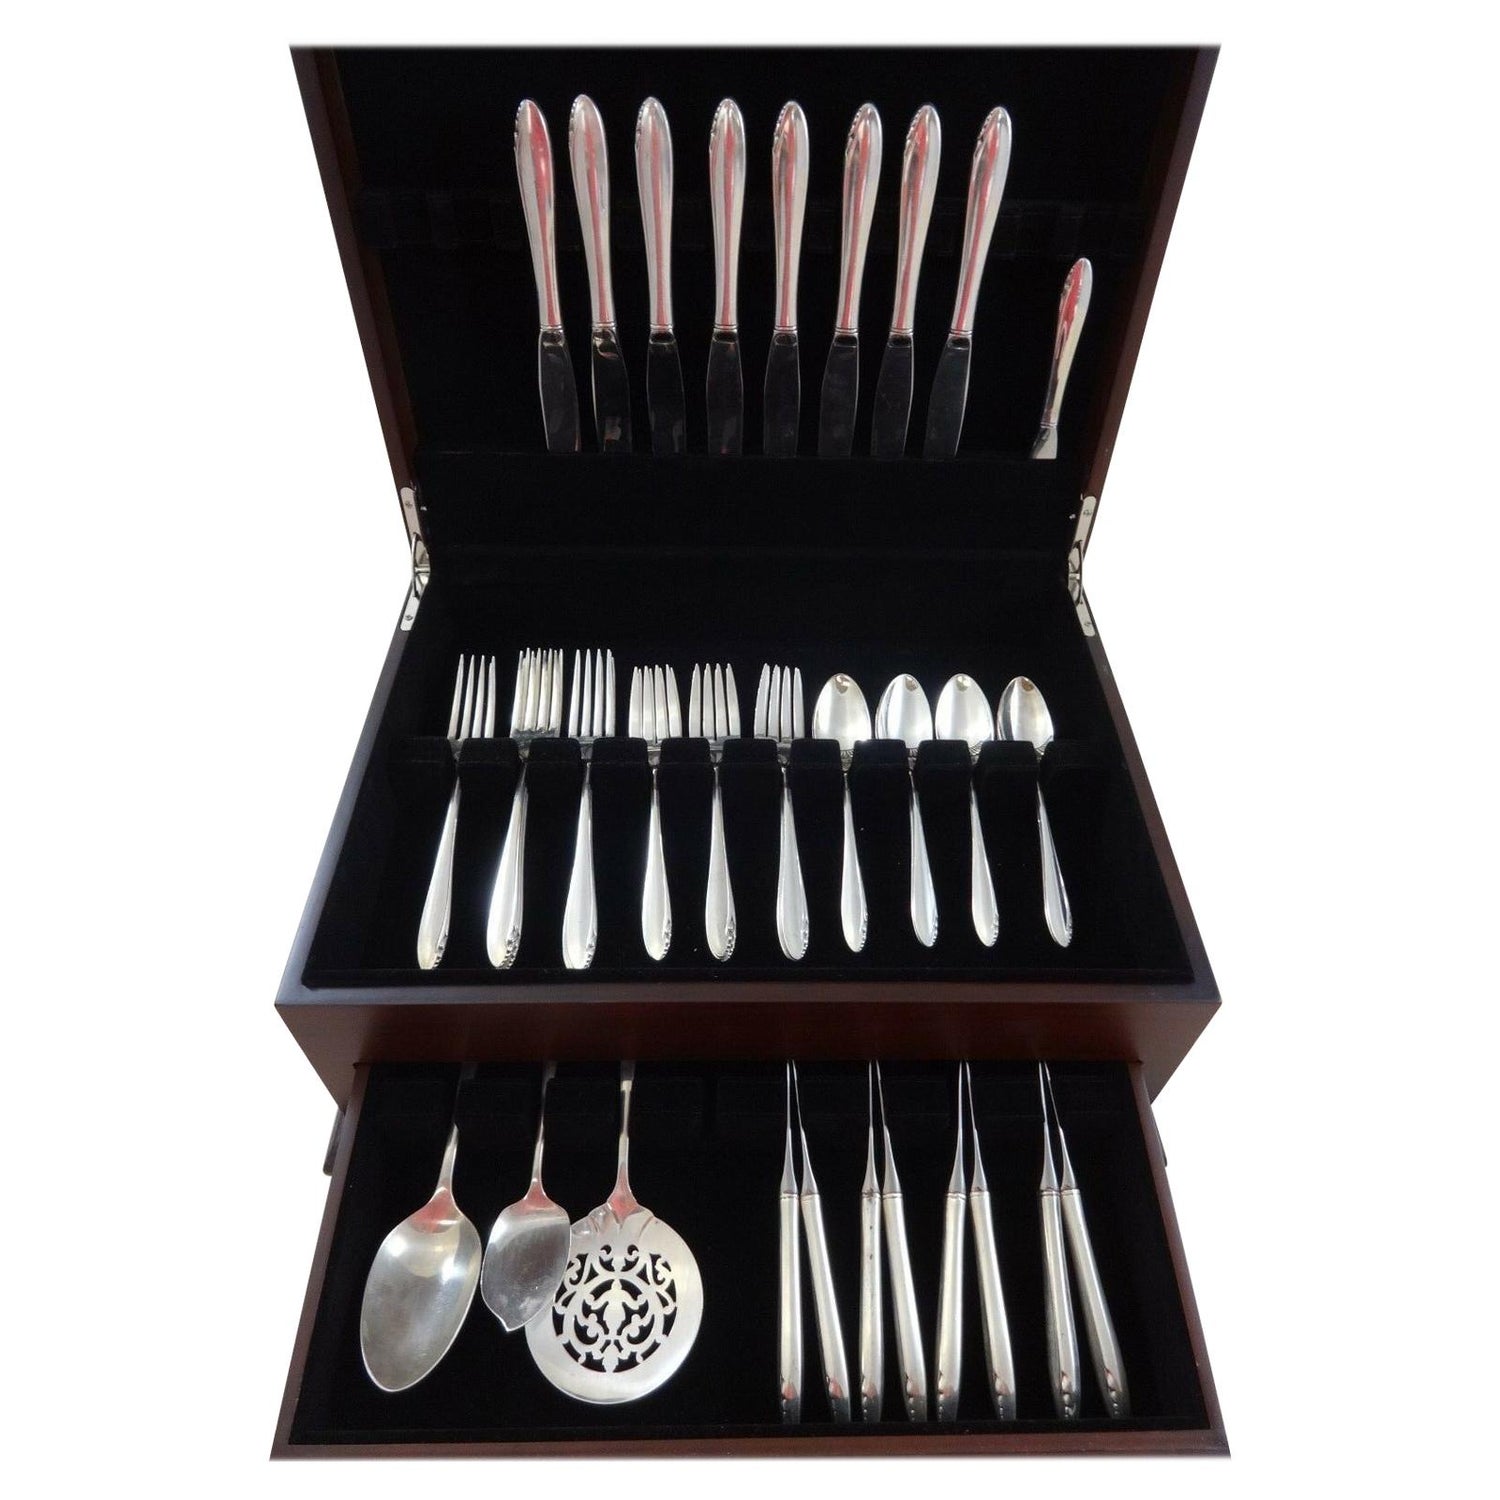 https://a.1stdibscdn.com/lasting-spring-by-oneida-sterling-silver-flatware-set-for-8-service-44-pieces-for-sale/1121189/f_150521121560293422617/15052112_master.jpg?width=1500